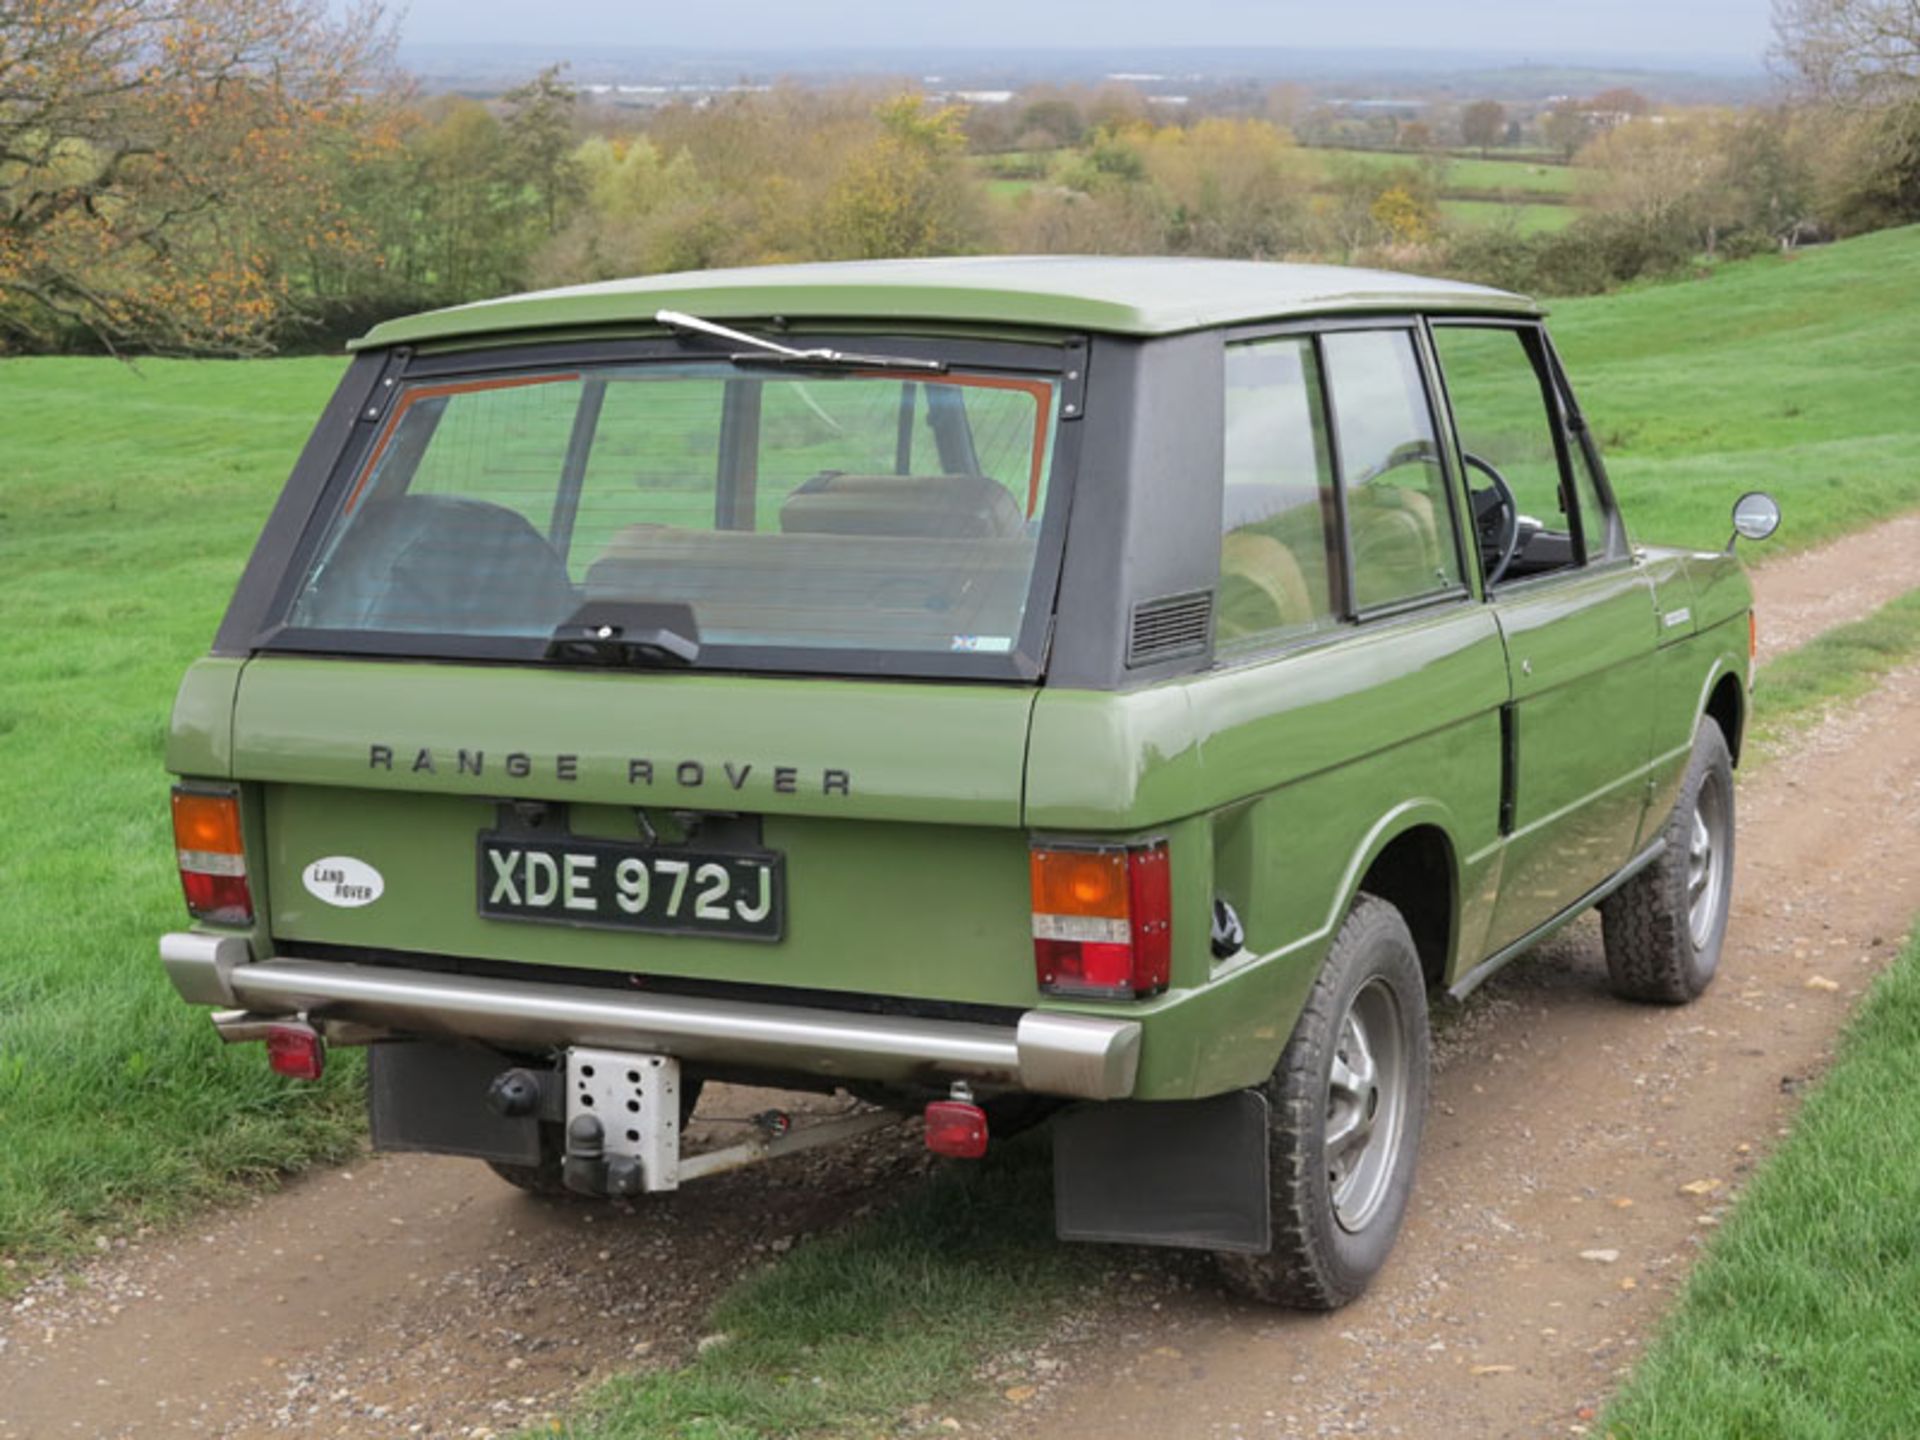 - Rare and desirable 'Suffix A' Range Rover

- 1 of 2,844 Home Market RHD cars built during the 1971 - Image 5 of 16